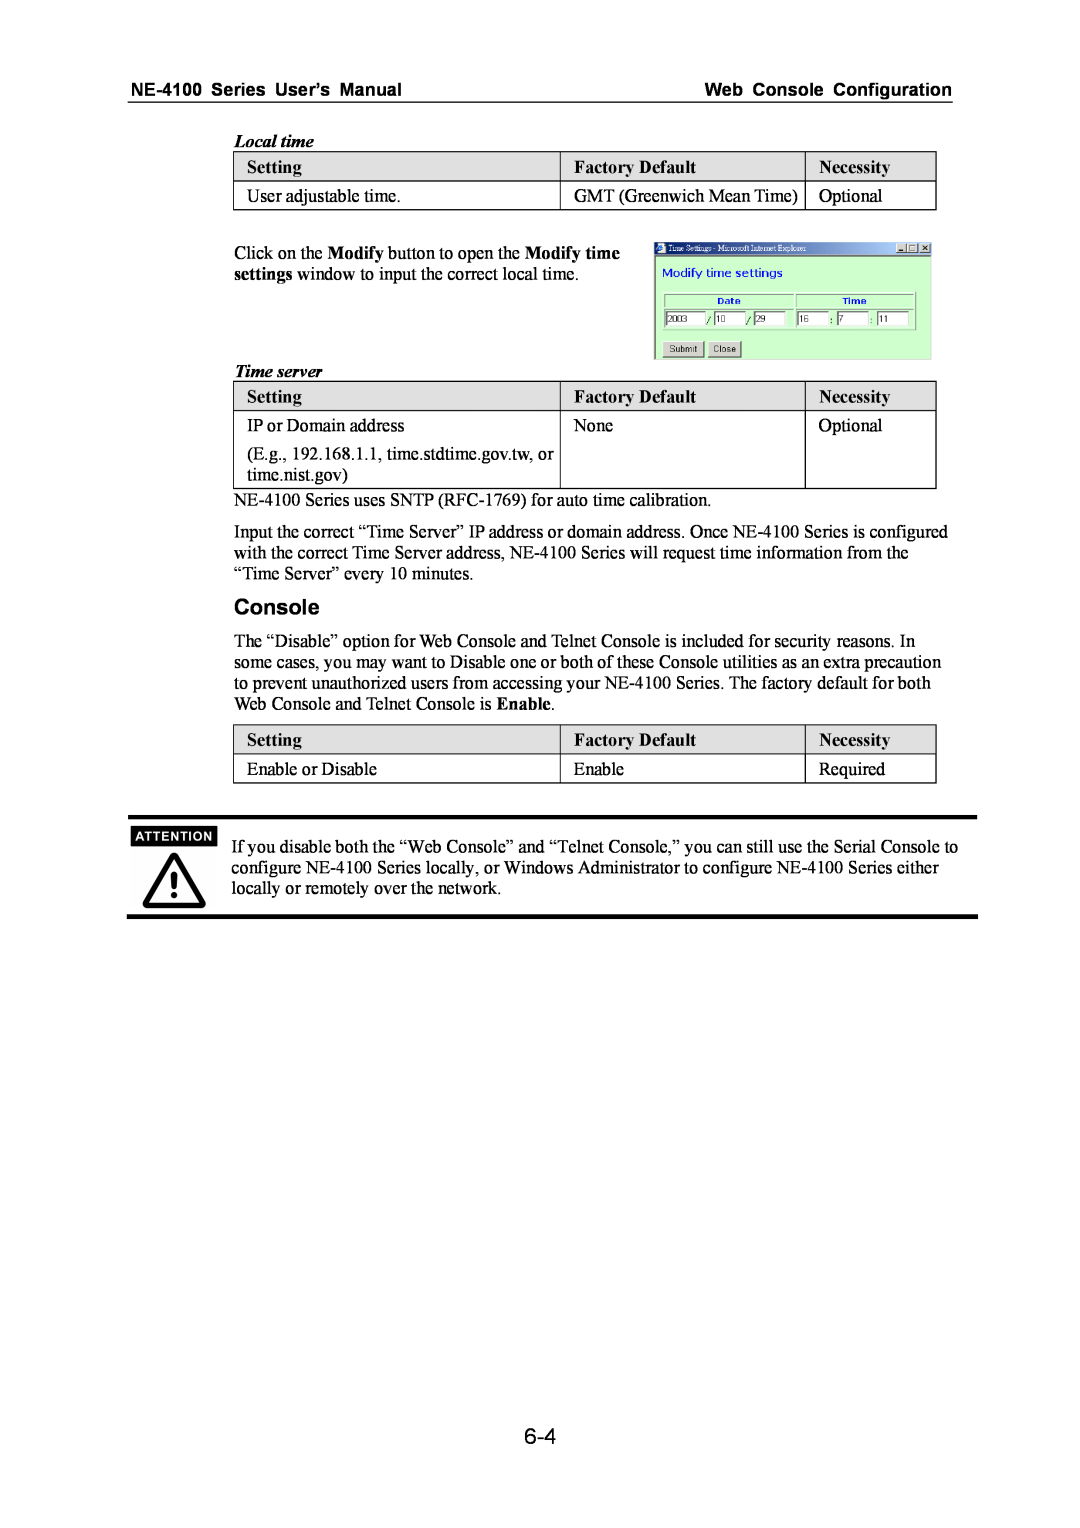 Moxa Technologies NE-4100 Series User’s Manual, Web Console Configuration, Local time, Setting, Factory Default 